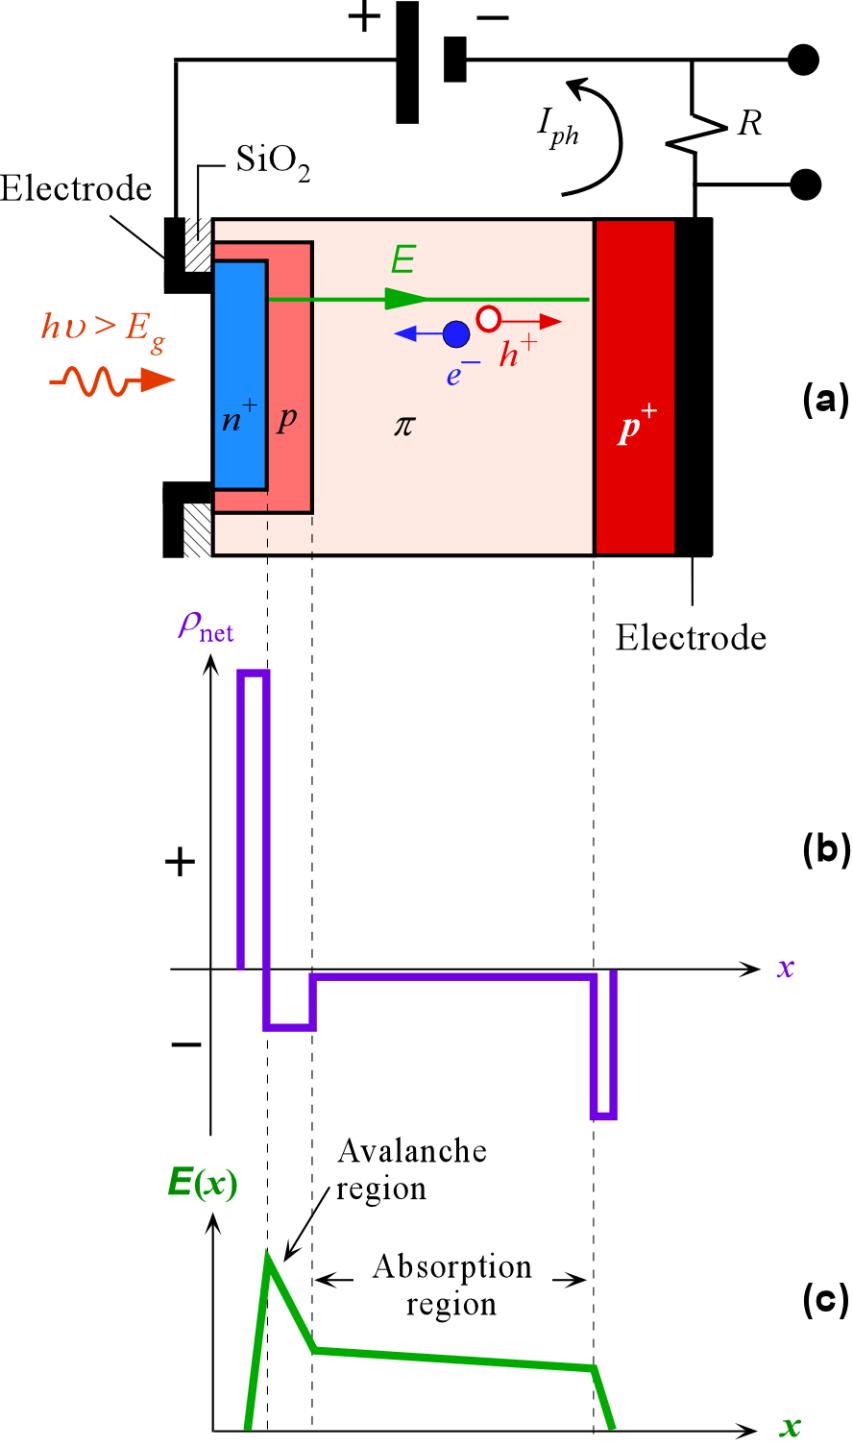 Avalanche Photodiode Converts incident light to large electric current by impact ionization processes.